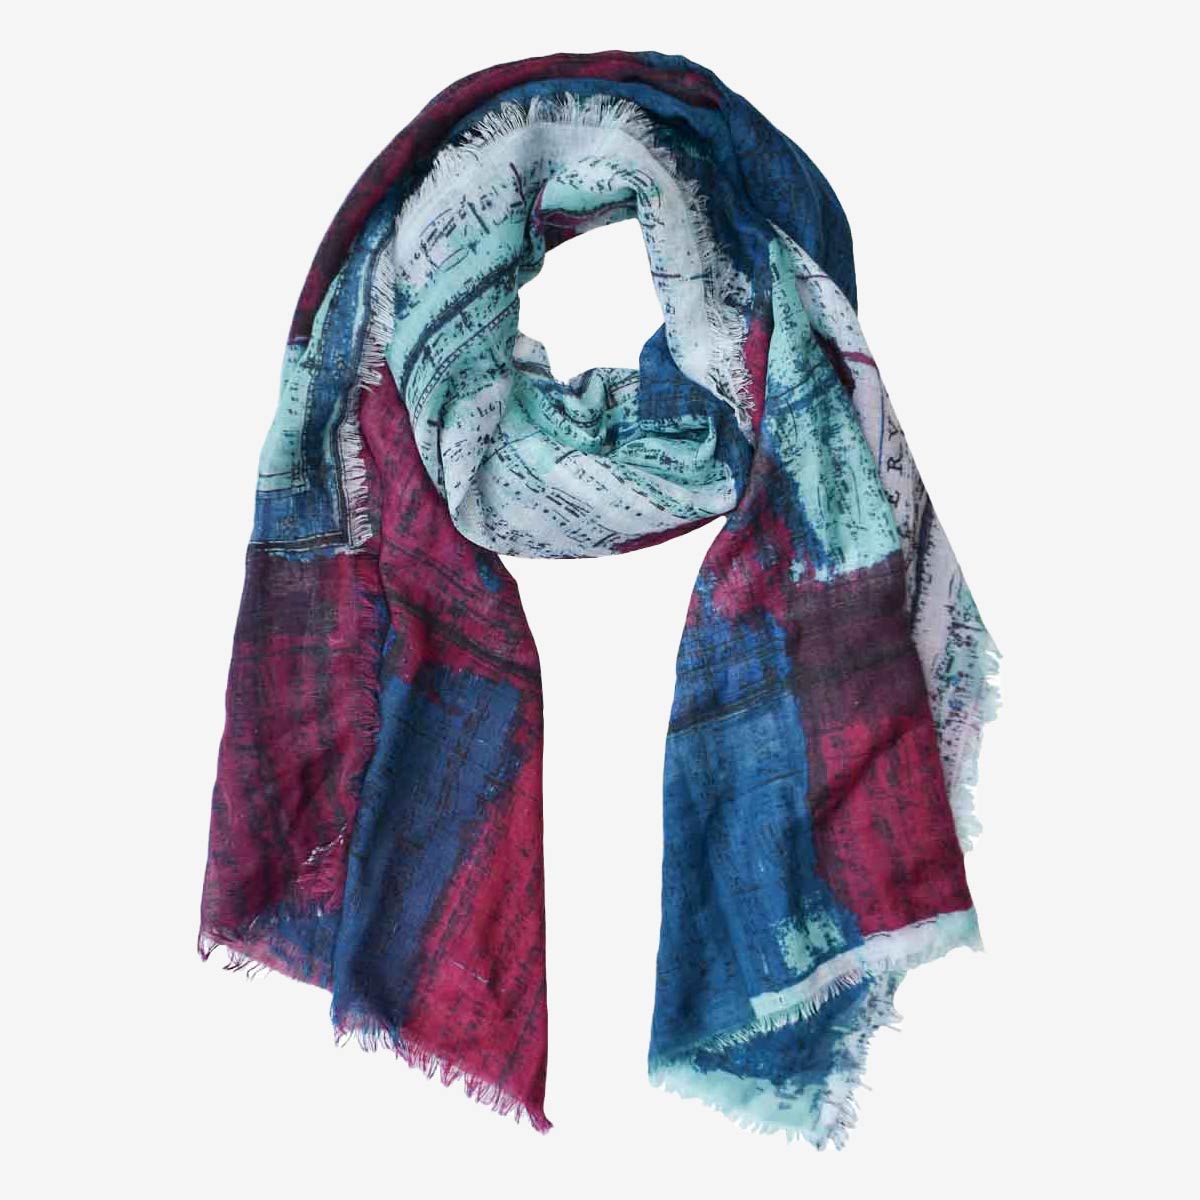 Map Print Scarf with Fringe in Multicolor Hues image number 1